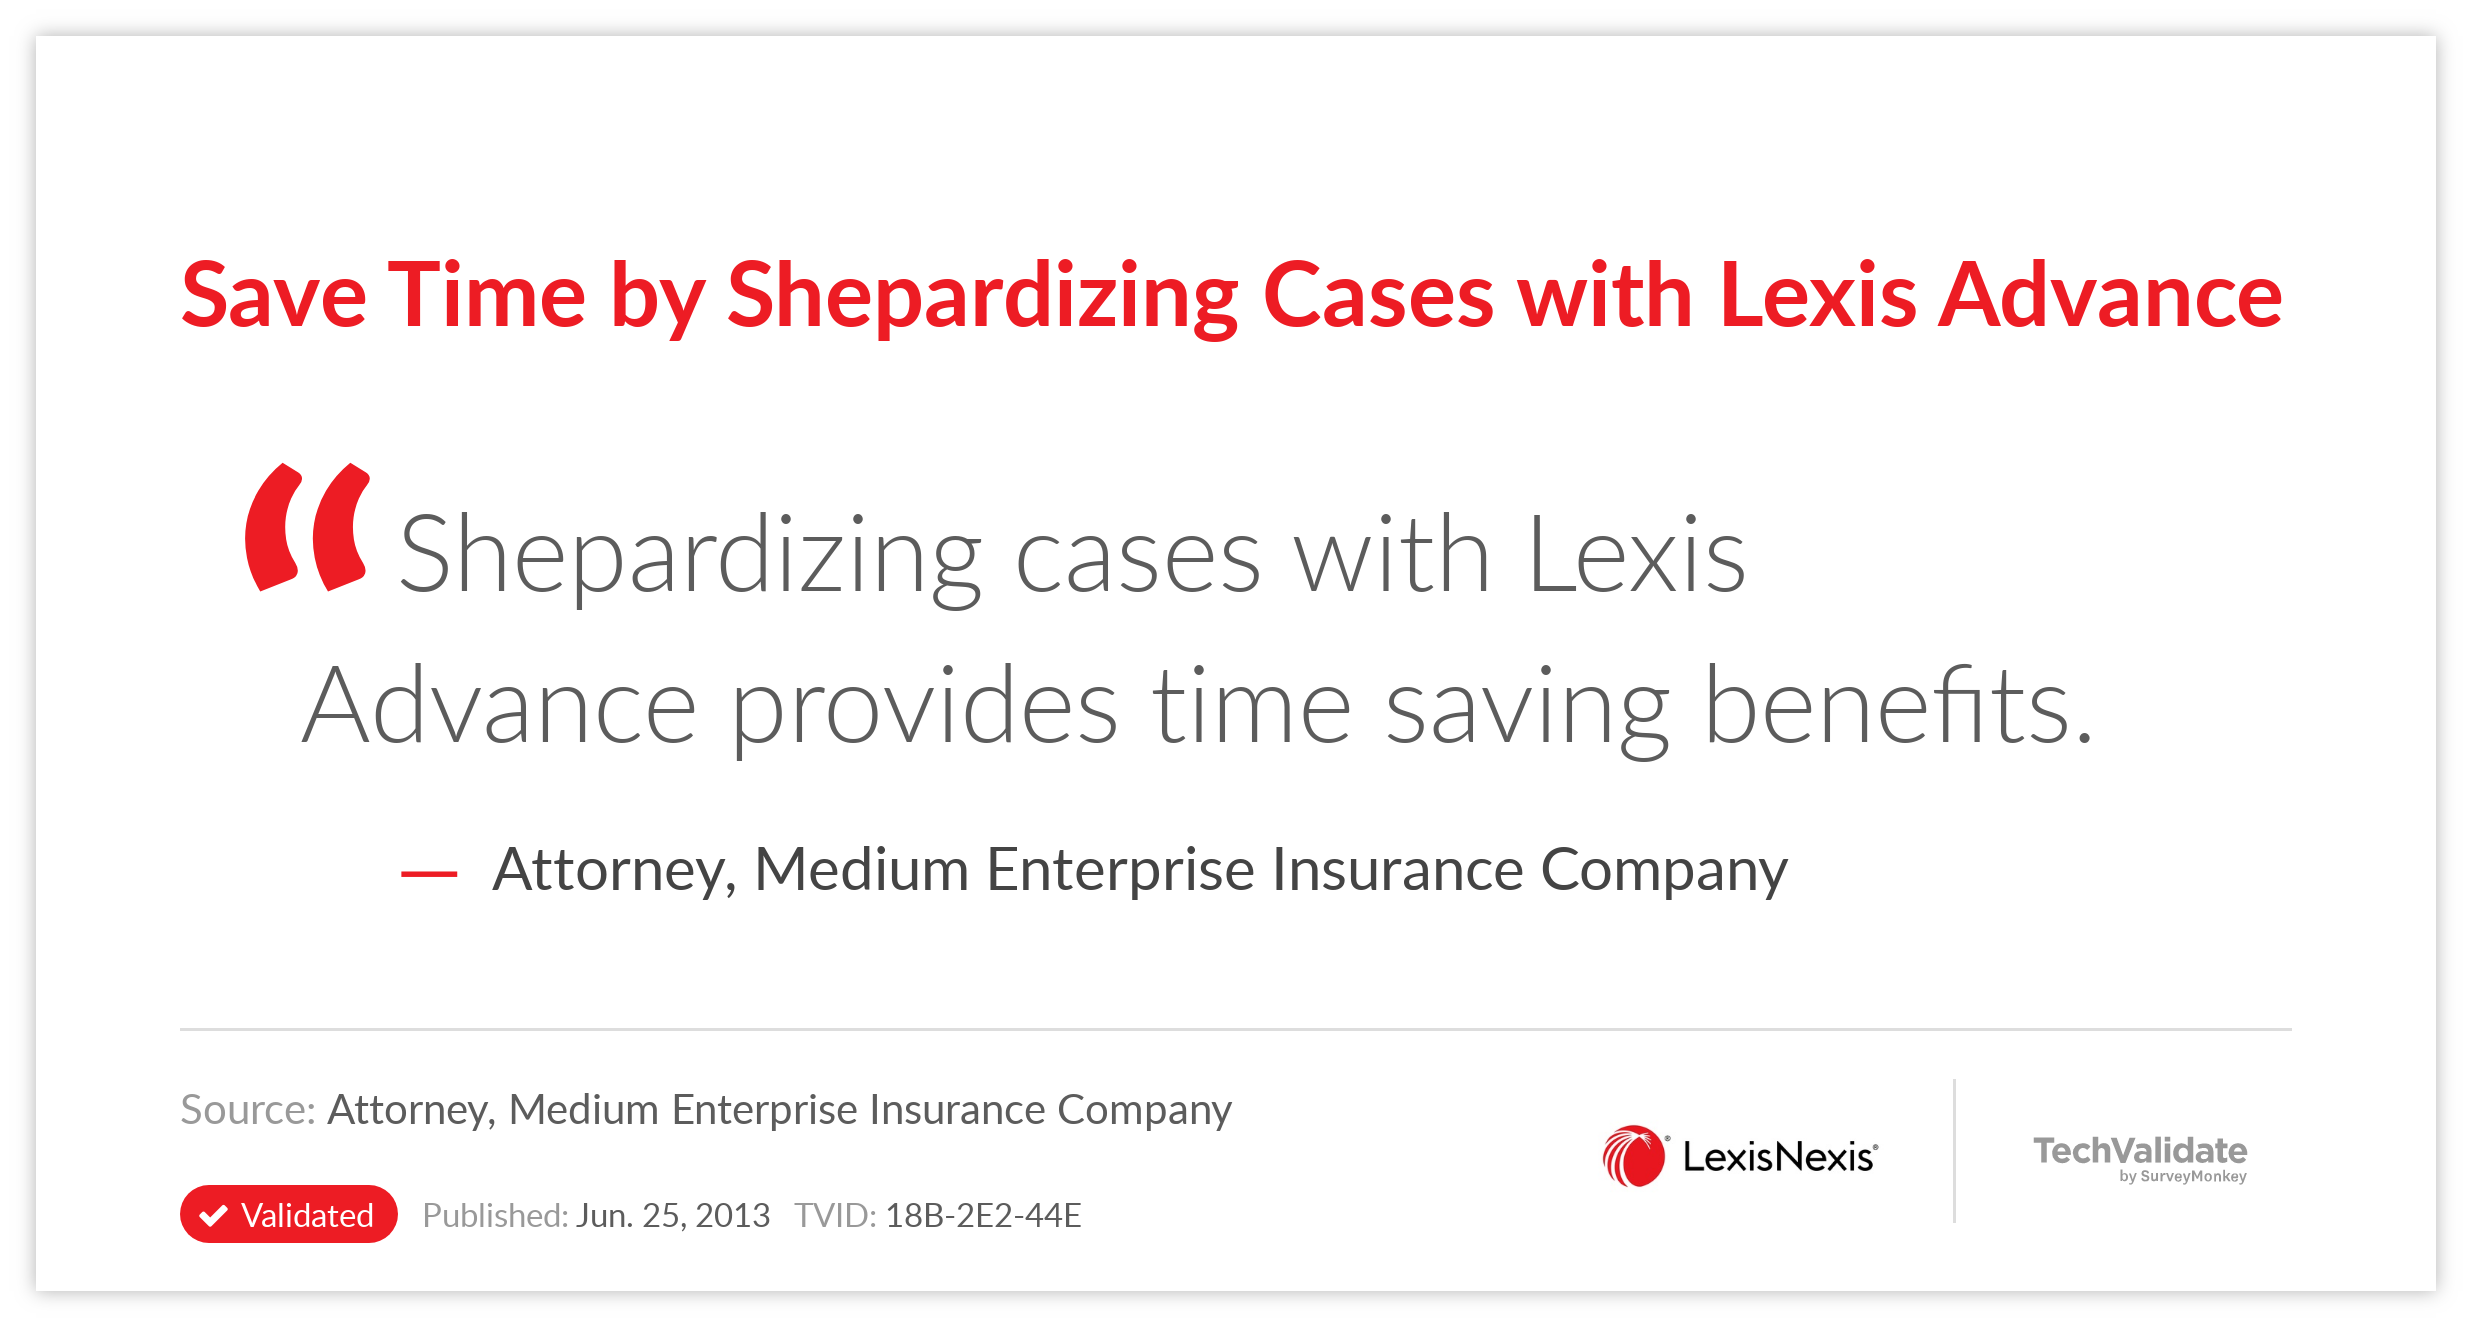 Save Time by Shepardizing Cases with Lexis Advance